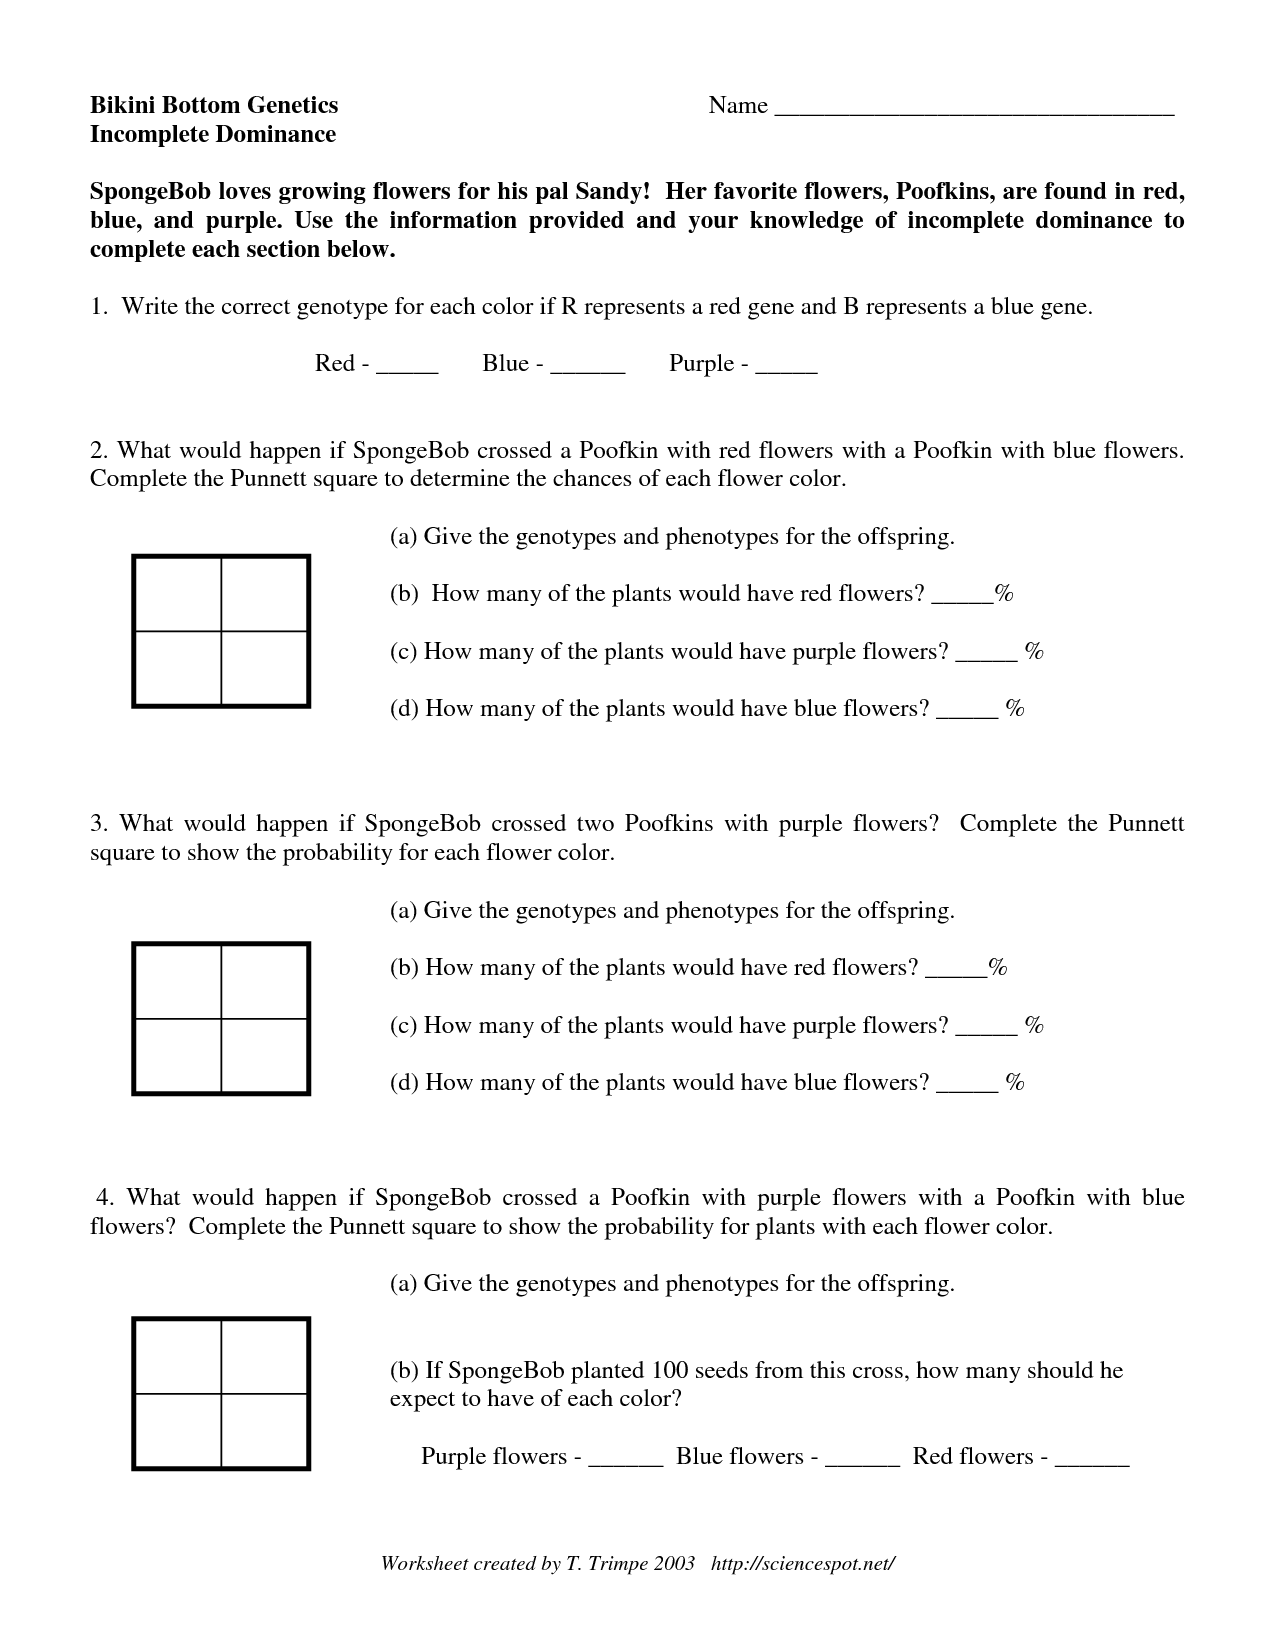 Codominance And Incomplete Dominance Worksheet Answer Key